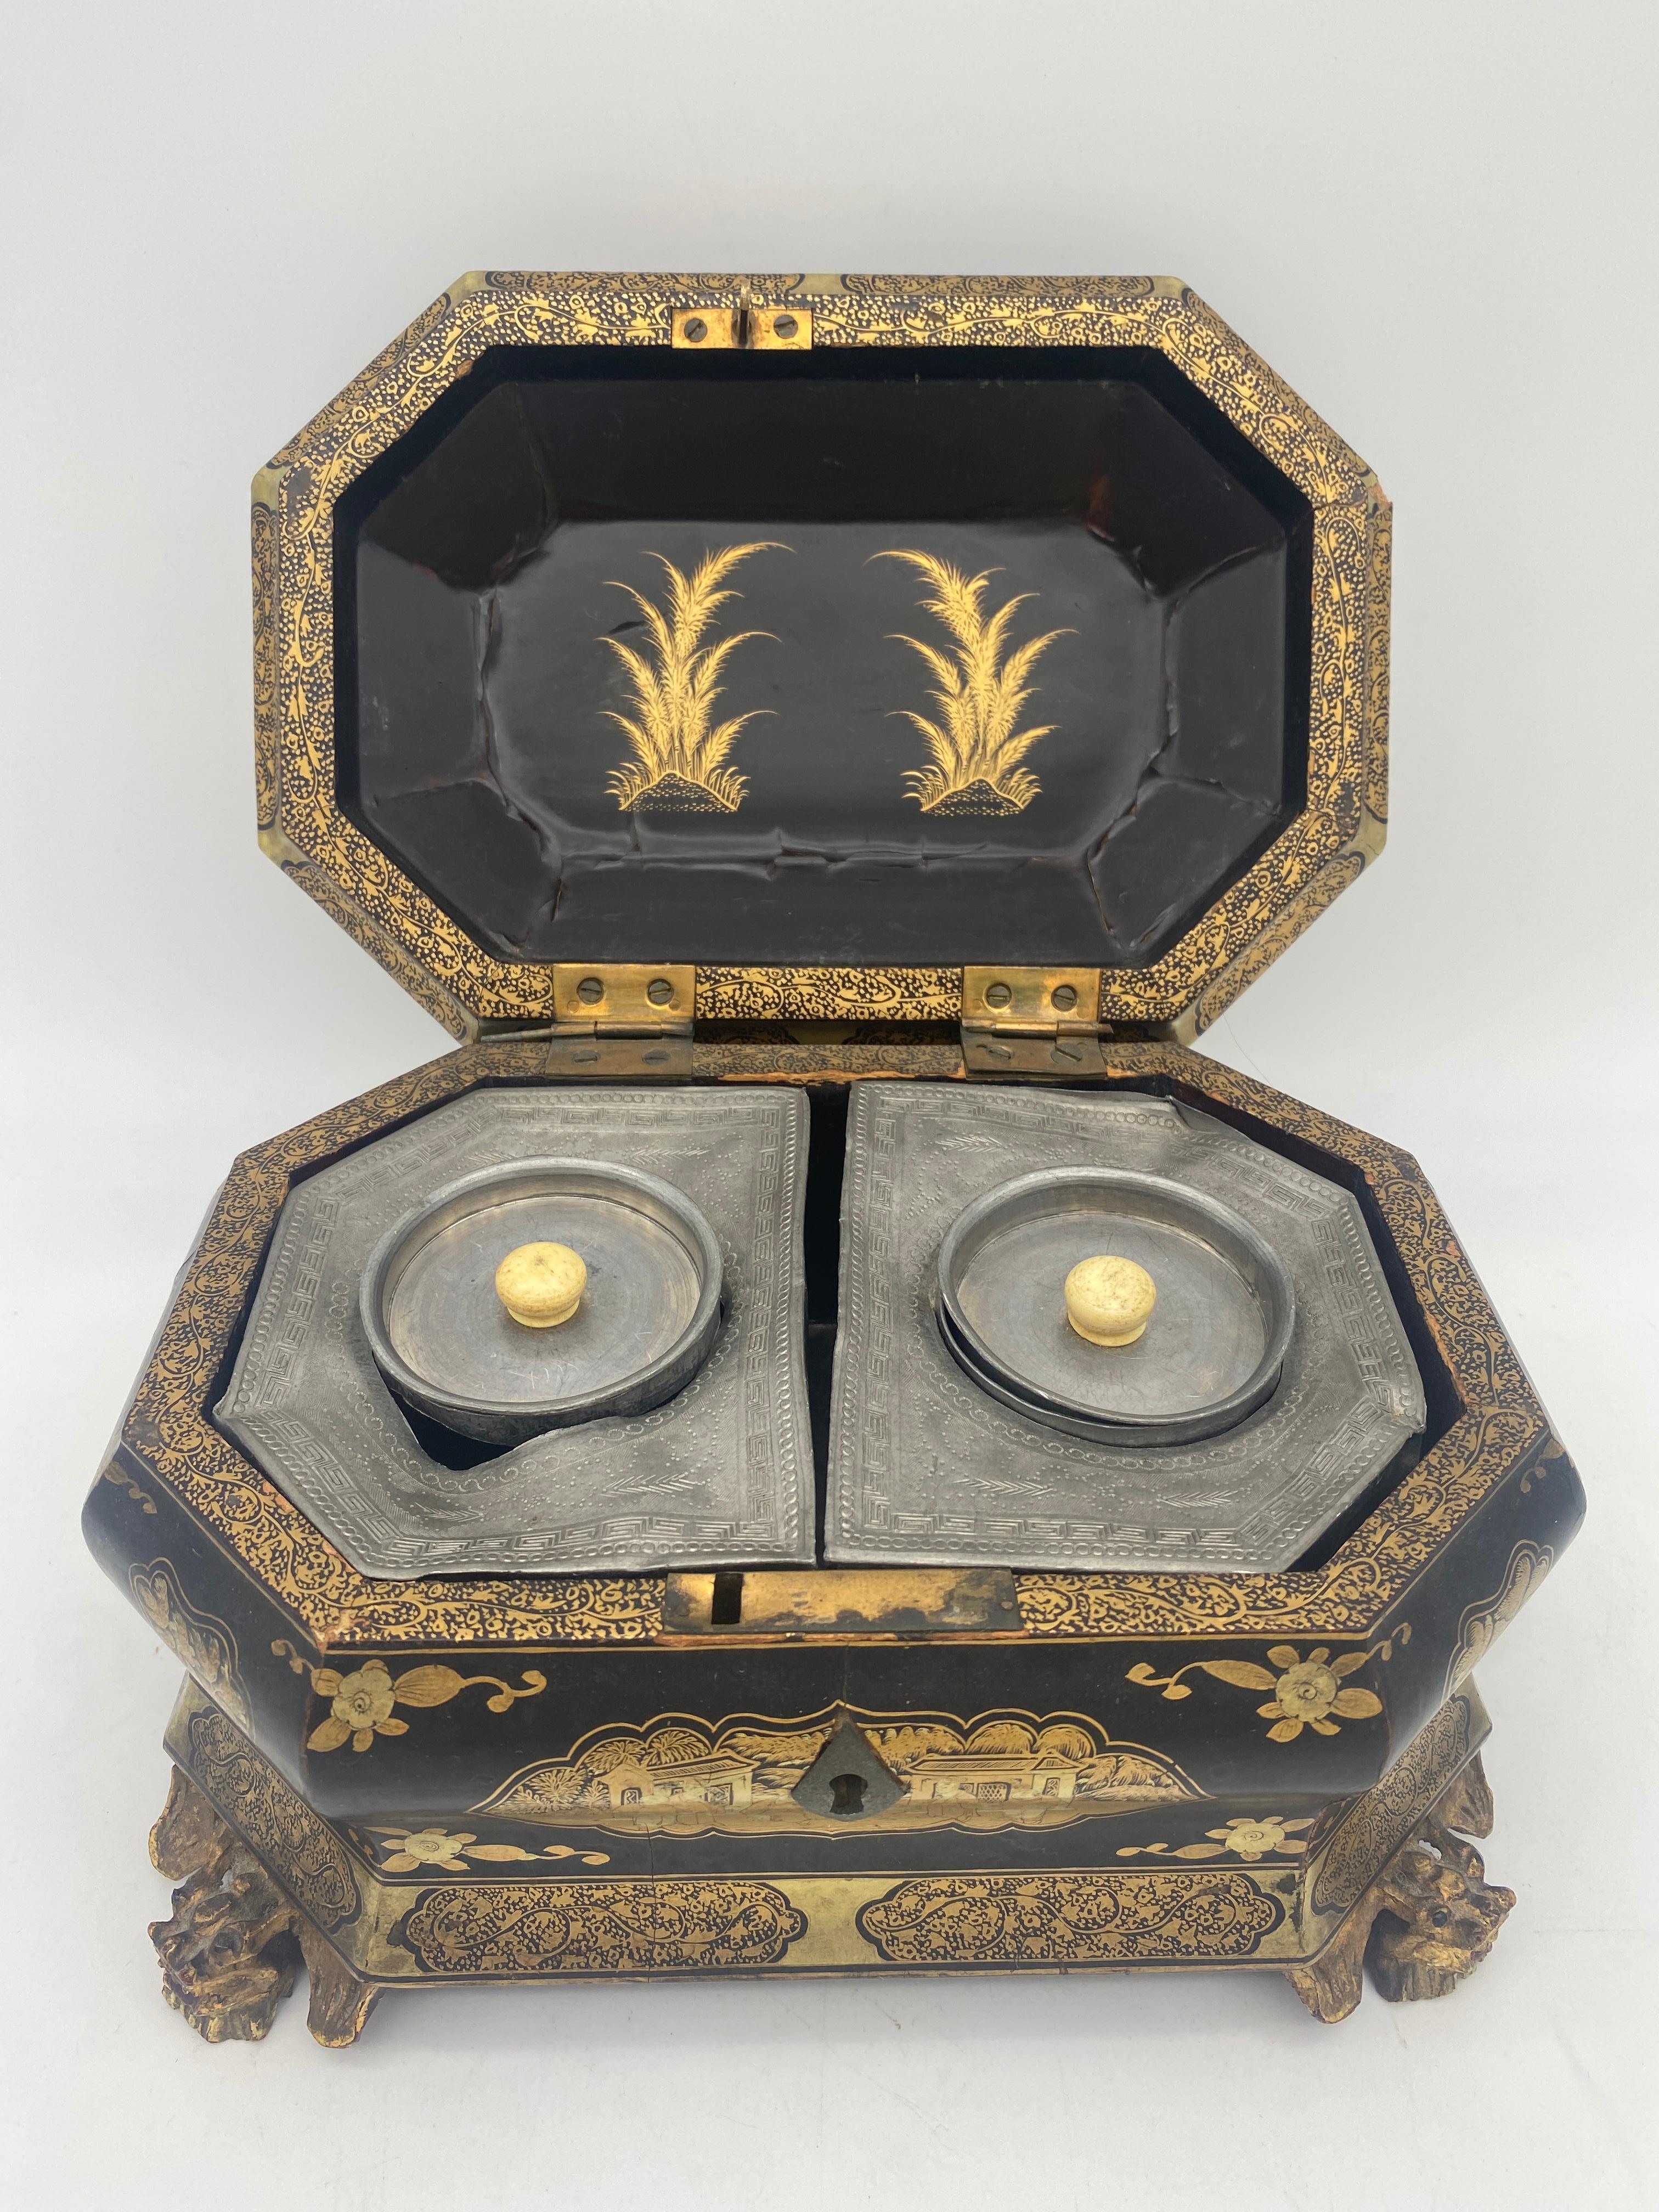 Hand-Carved 19th Century Antique Gilt Lacquer Chinese Tea Caddy For Sale